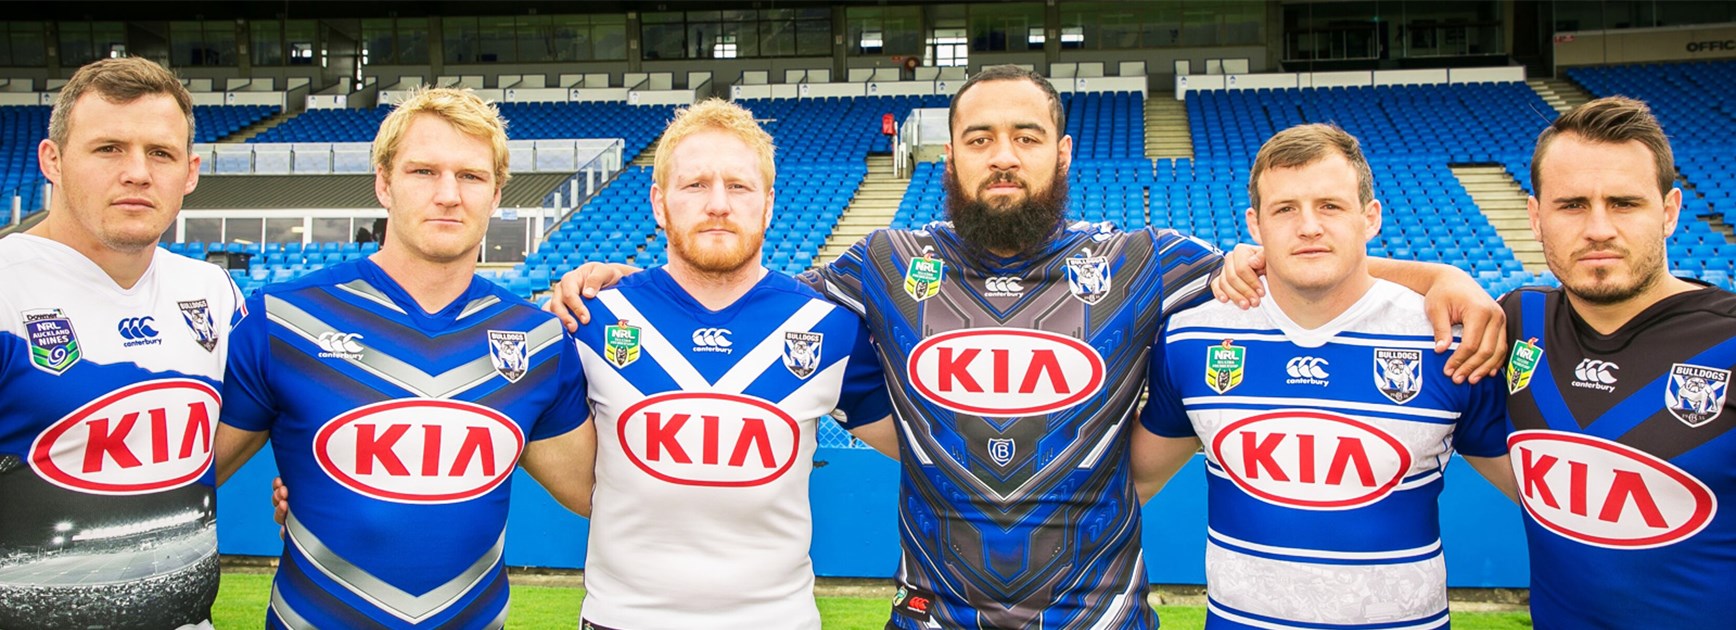 Bulldogs players show off their new jerseys for 2017.